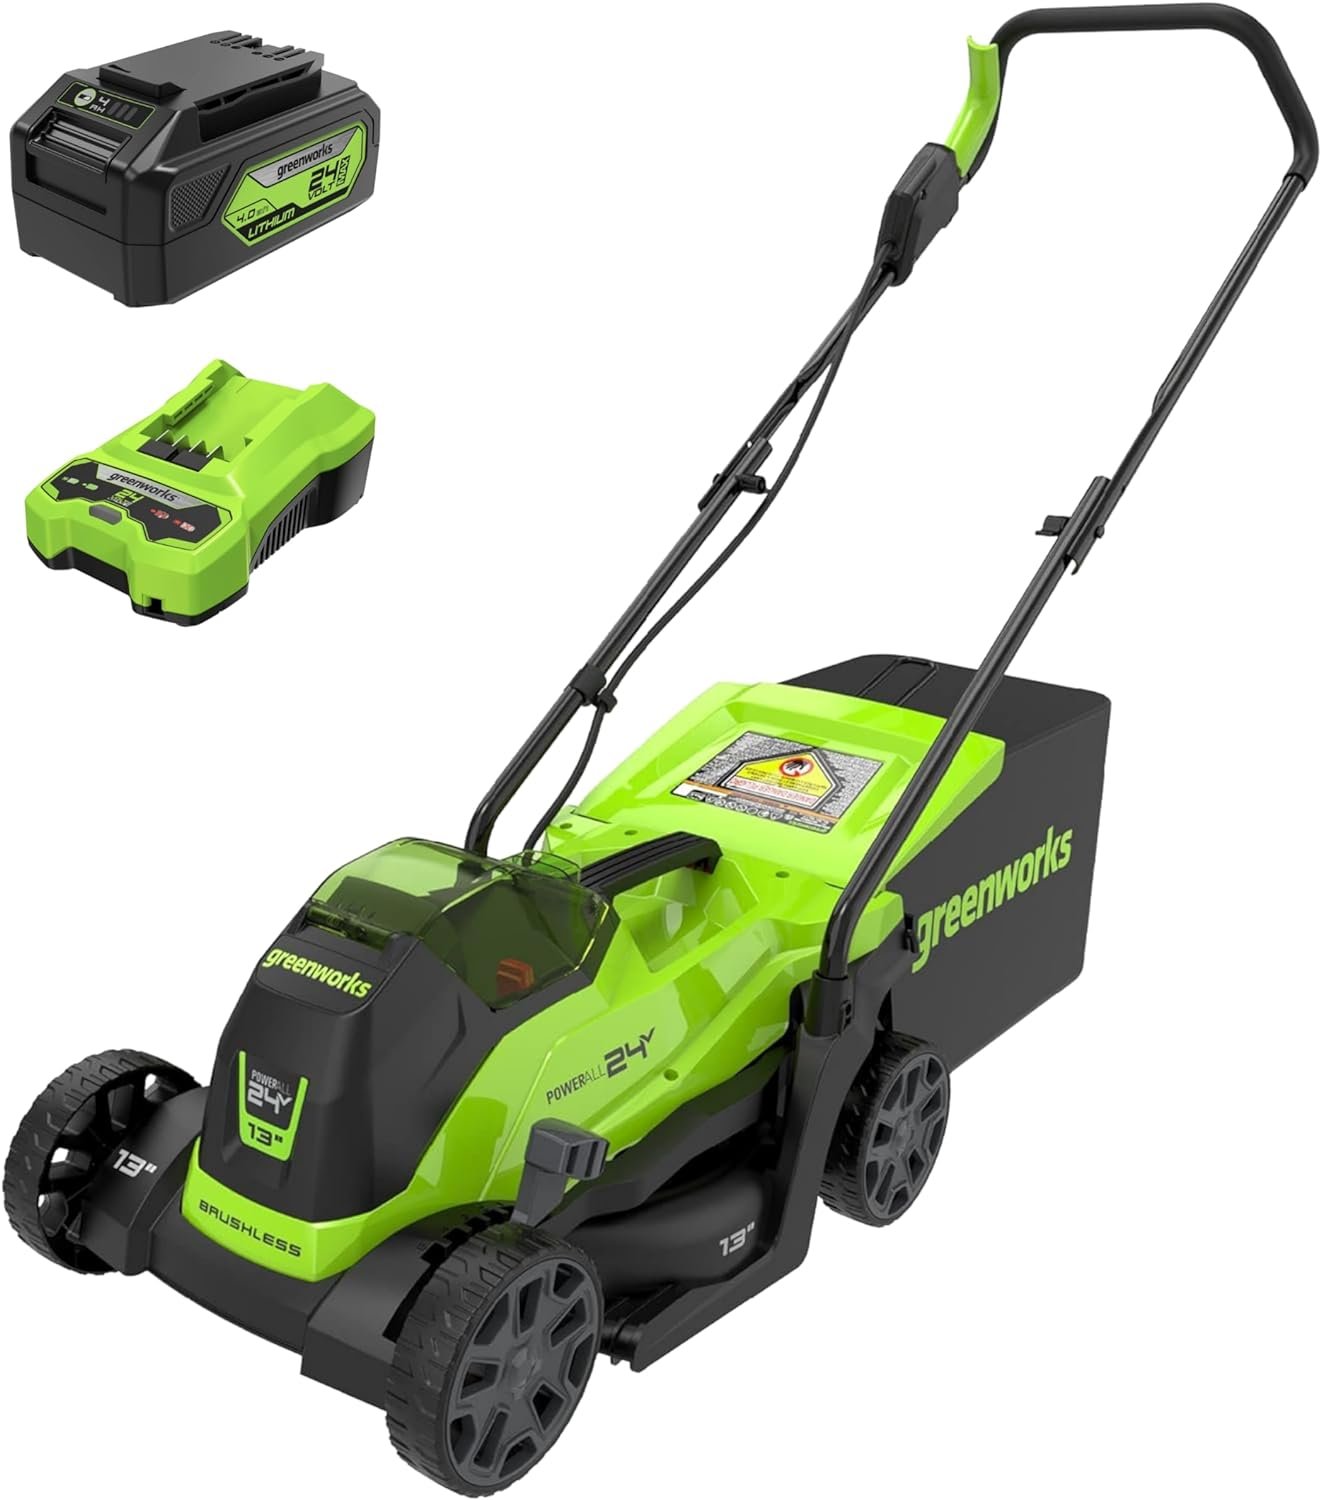 Greenworks 24V 13 Brushless Cordless (Push) Lawn Mower, 4.0Ah Battery and Charger Included